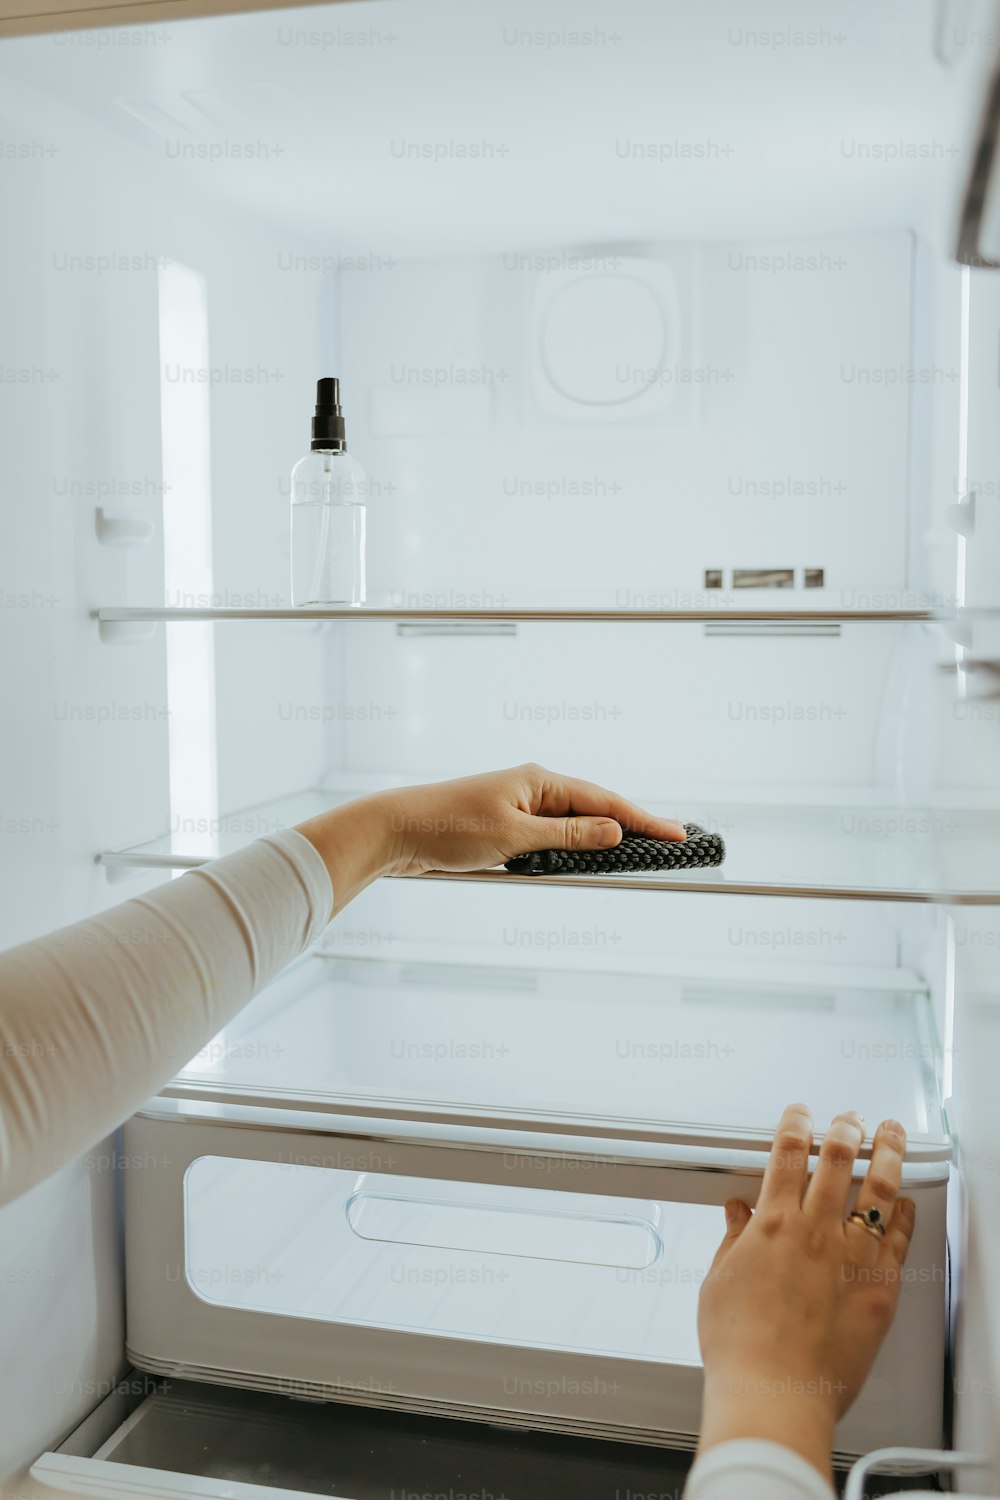 a woman holding a remote control in front of a refrigerator